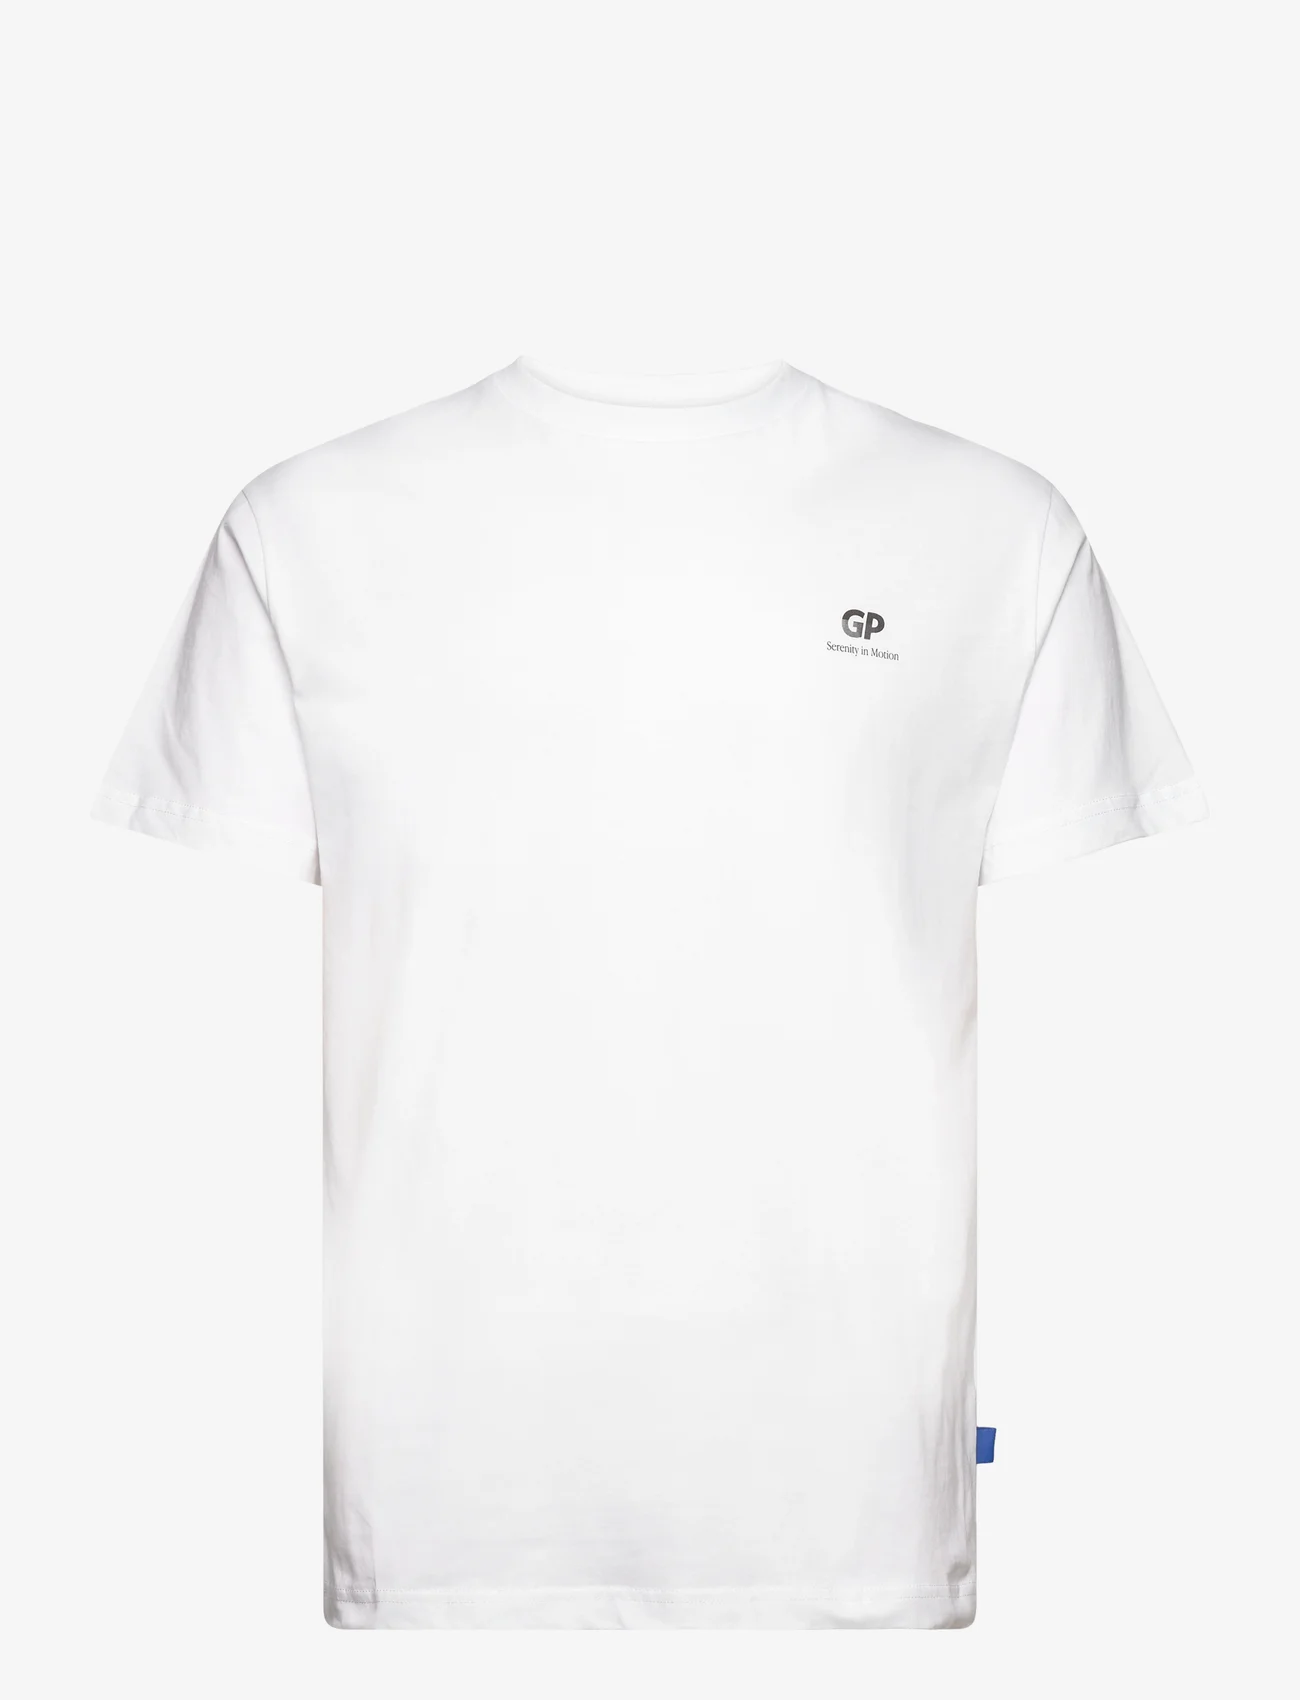 Garment Project - Relaxed Fit Tee - White / Serenity in motion - kurzärmelige - white - 0